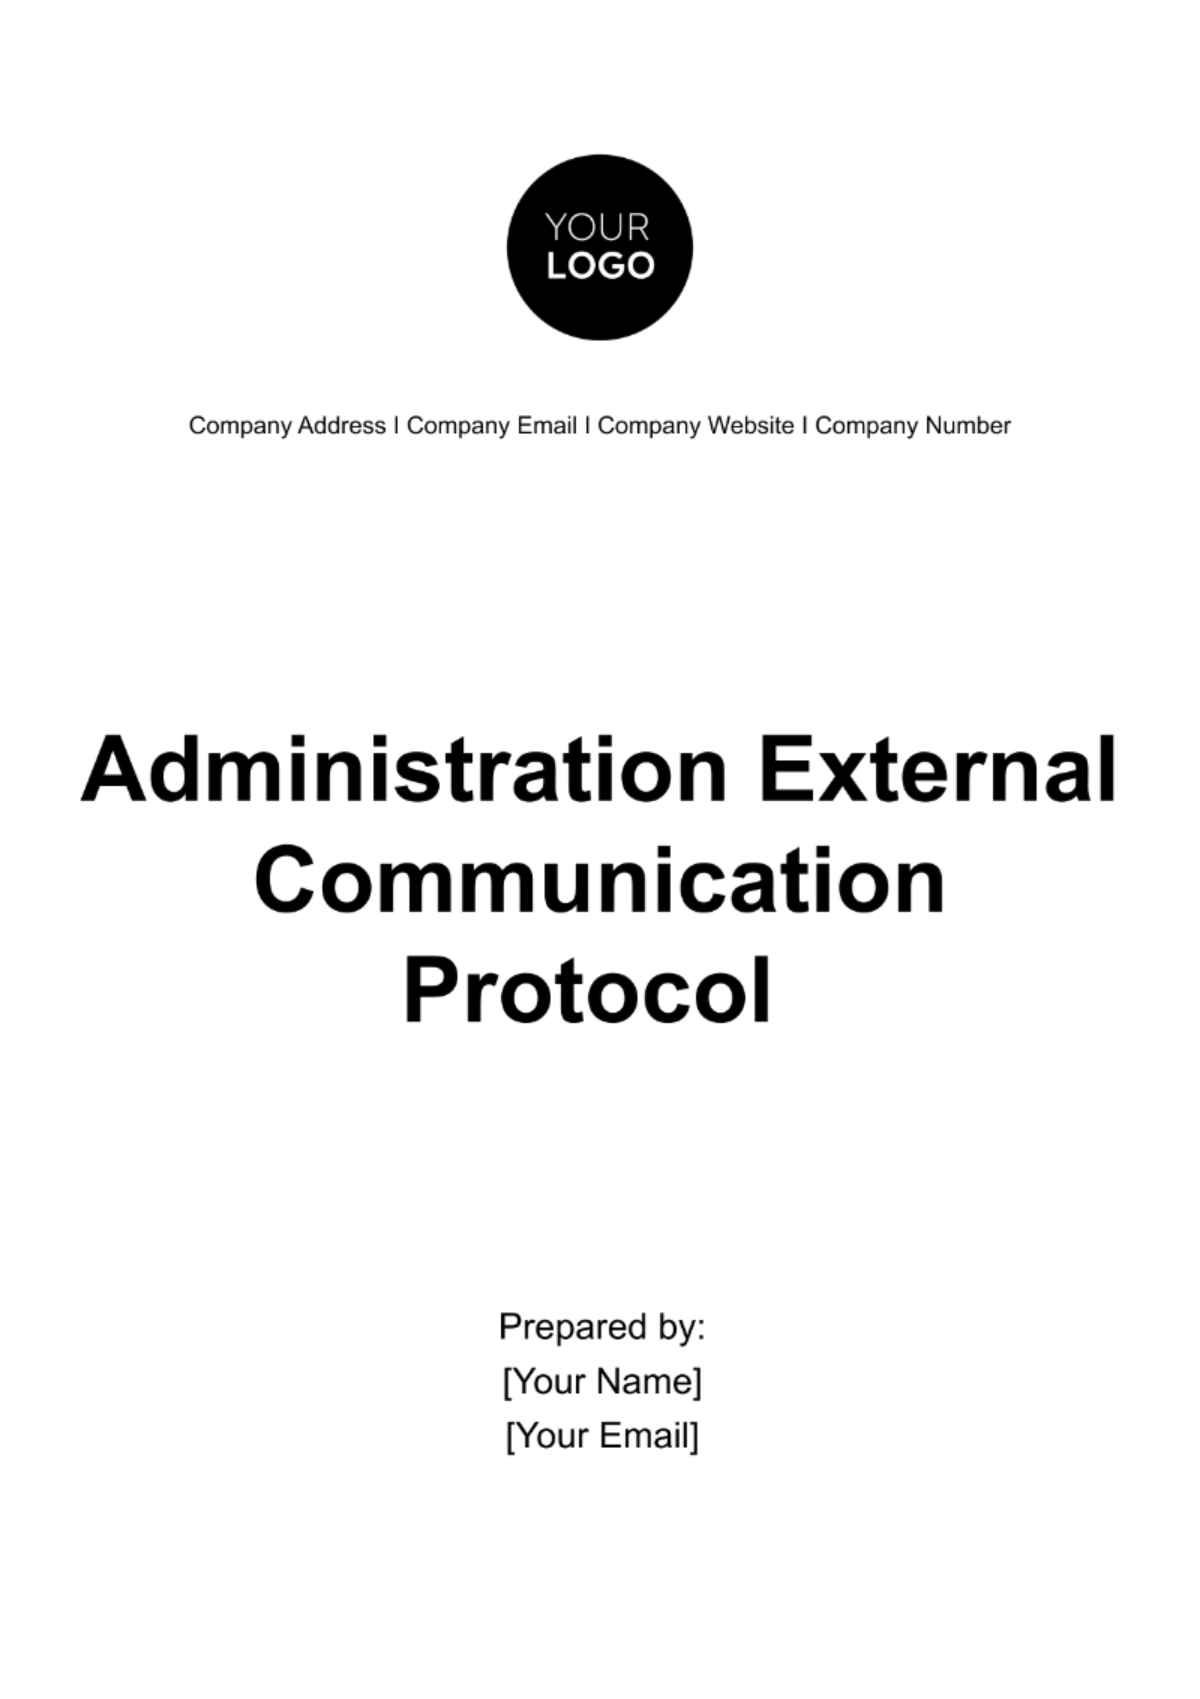 Administration External Communication Protocol Template